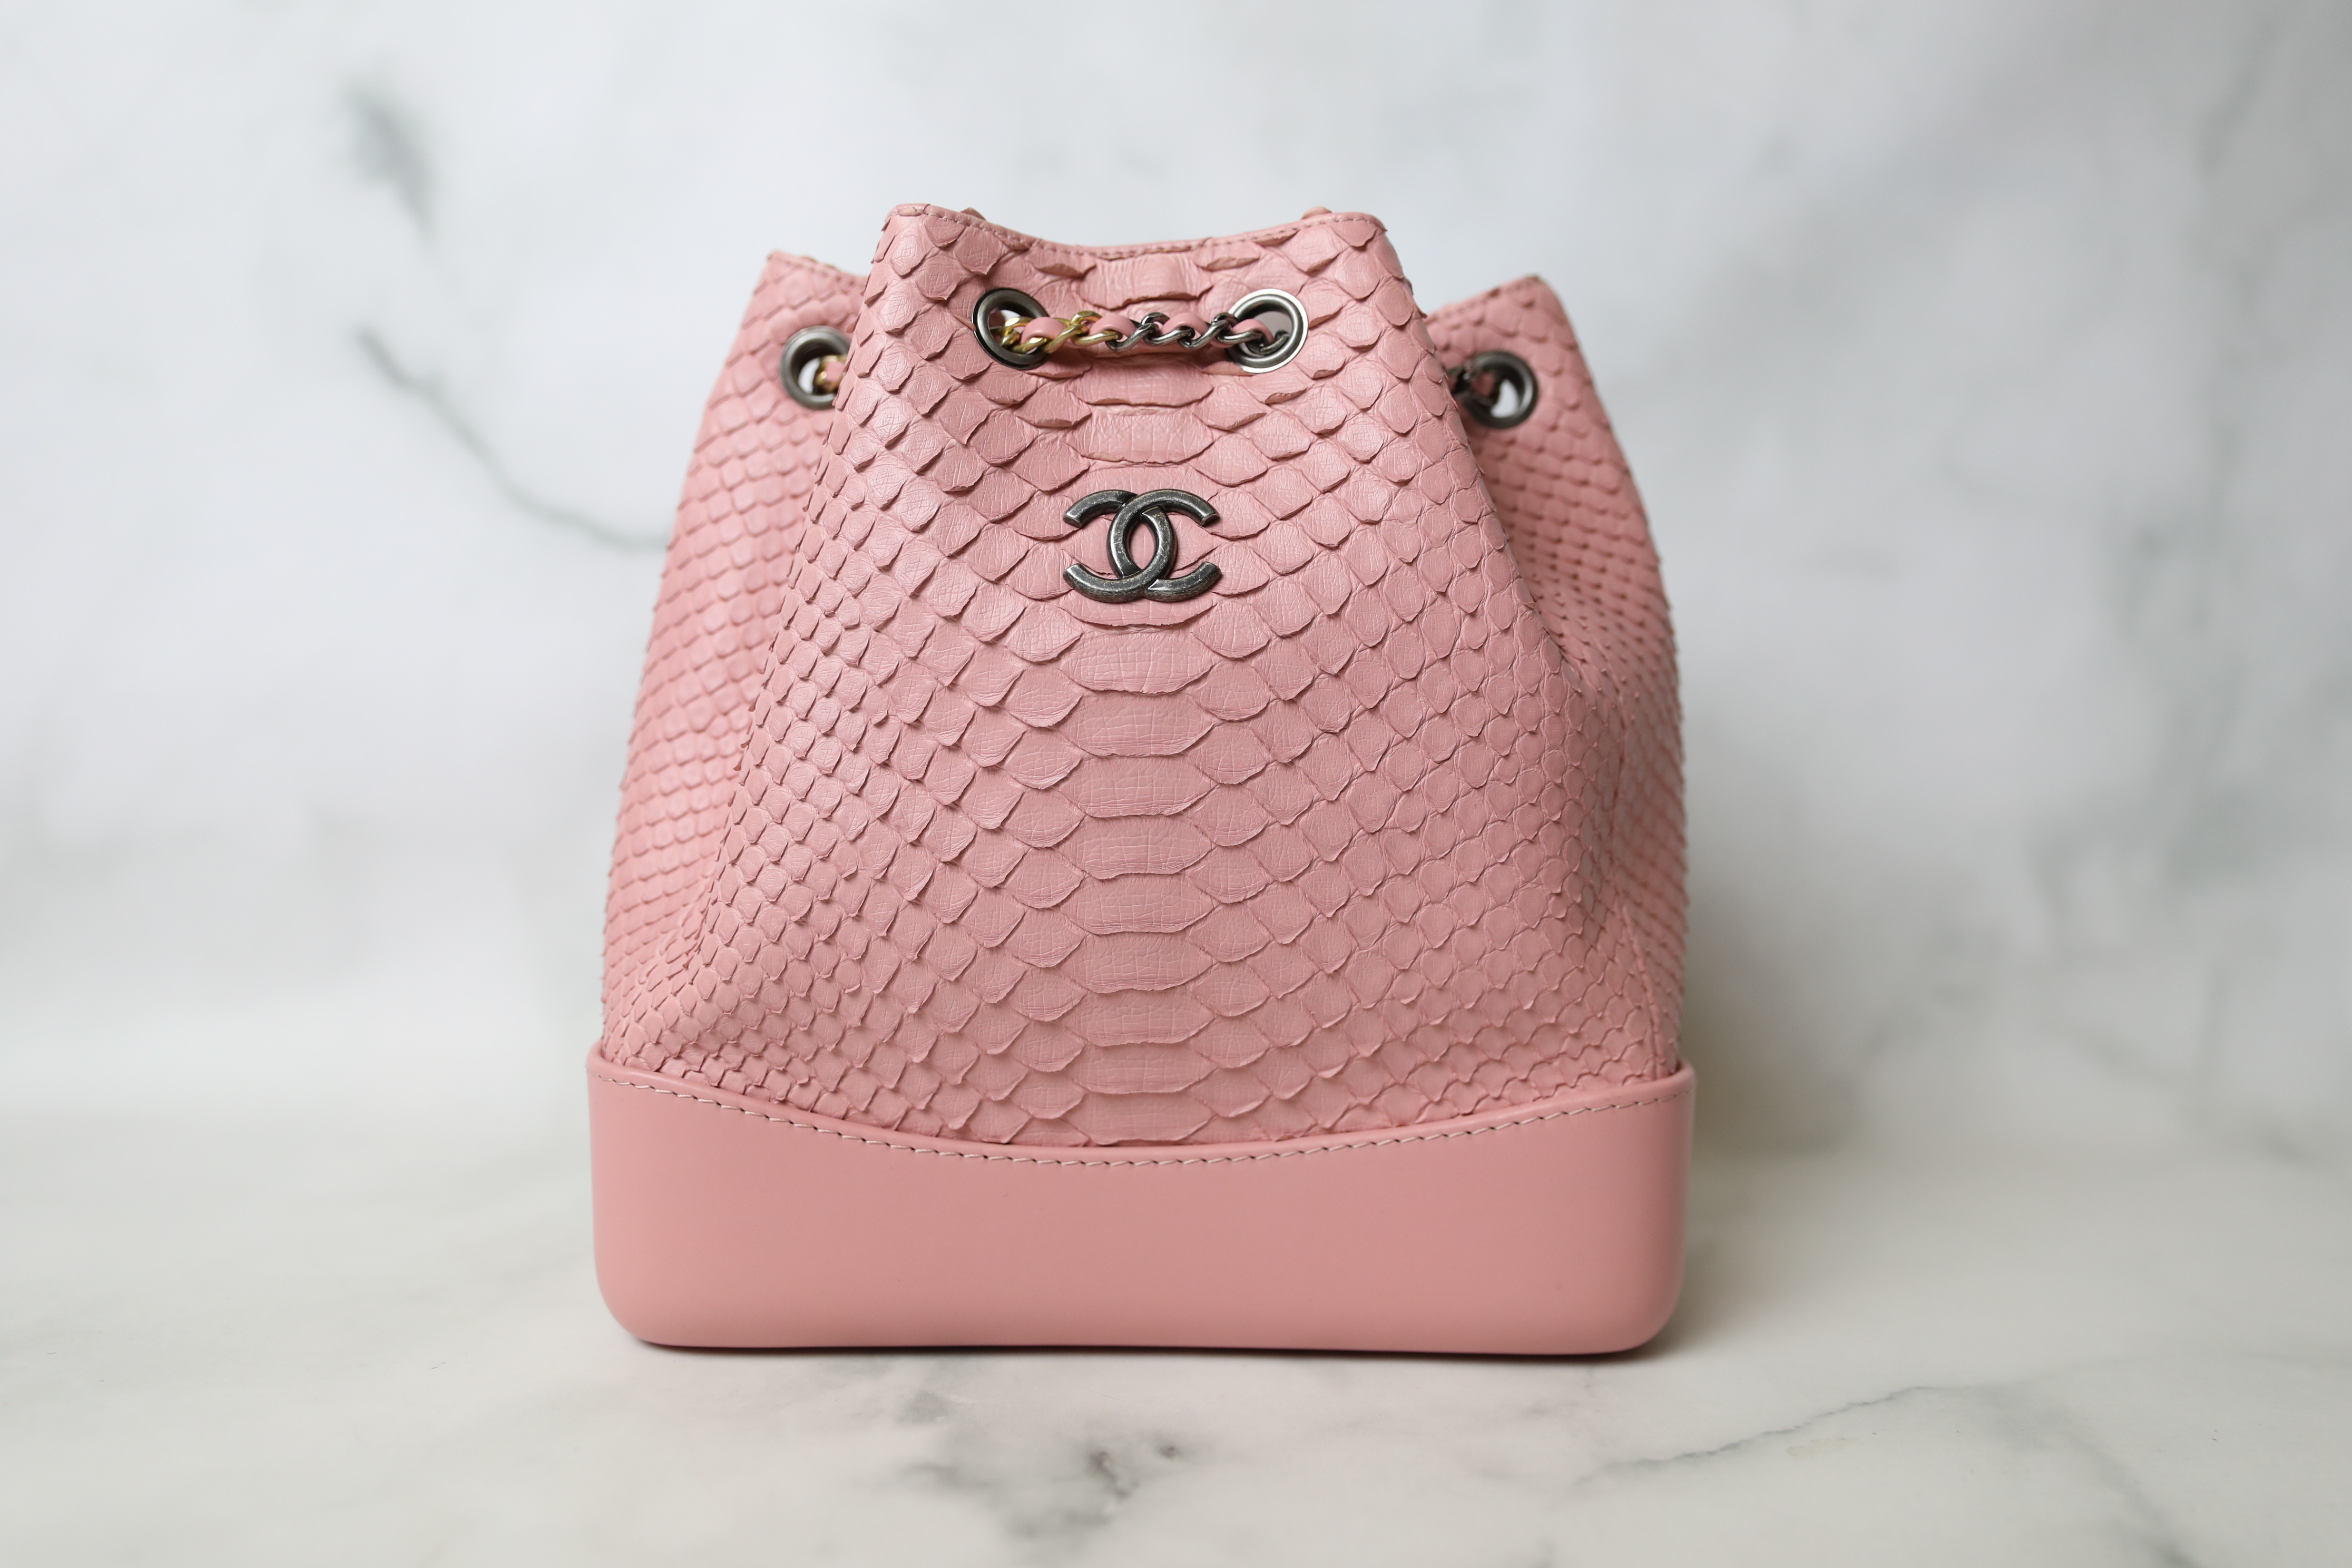 Chanel Gabrielle Backpack, Pink Exotic Python with Gold Hardware, Preowned  in Box WA001